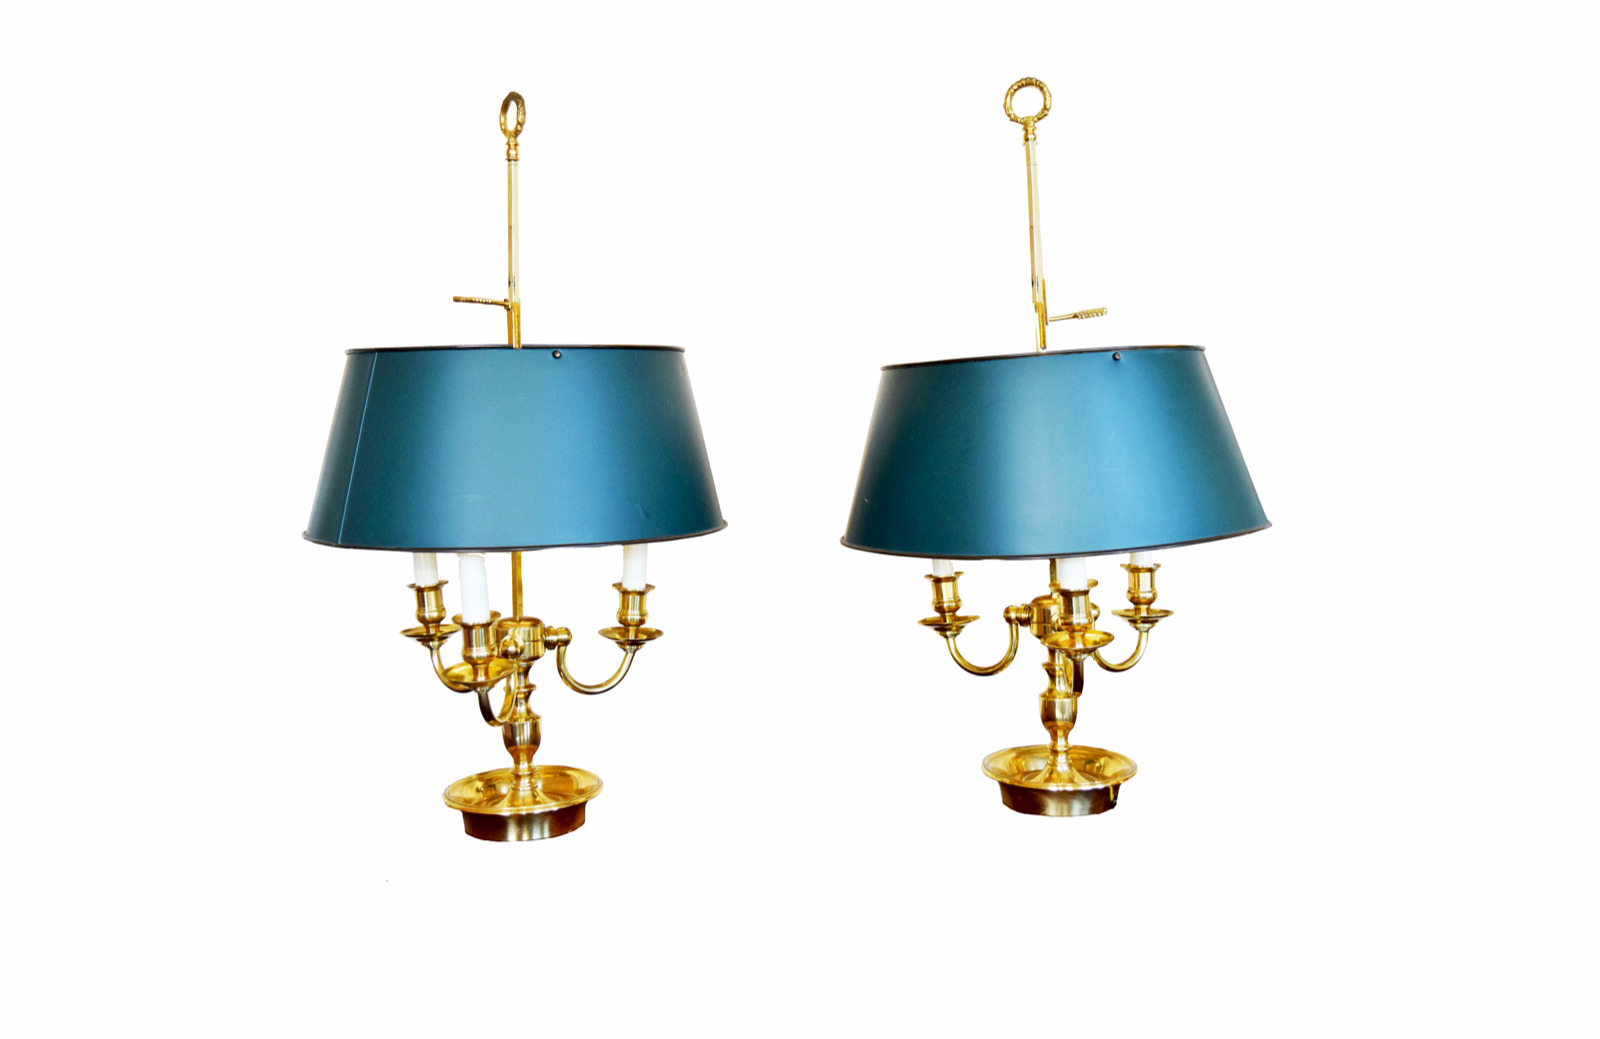 Pair of French Bouillotte Lamps